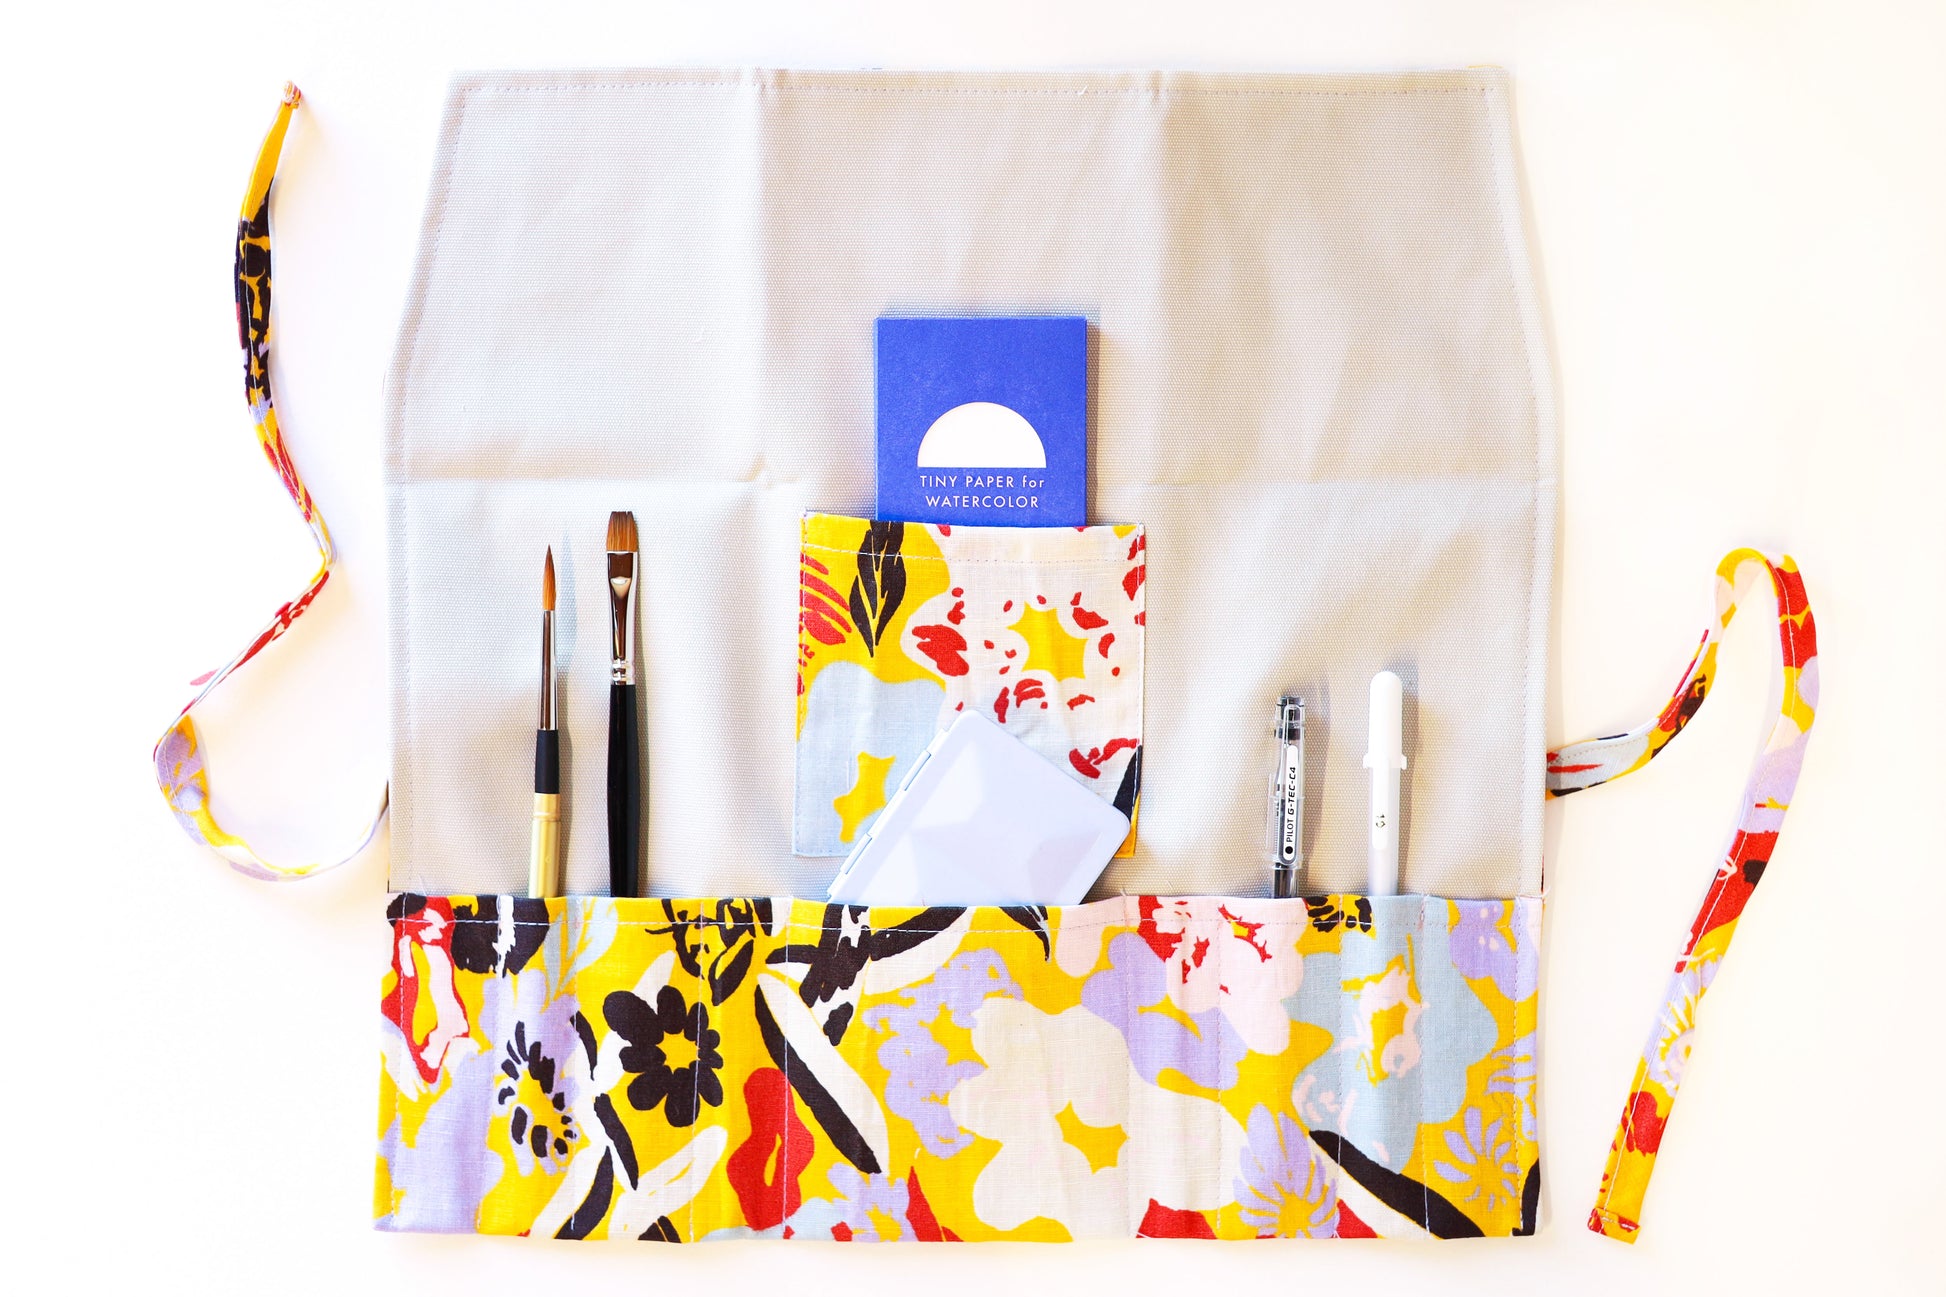 The open Primo Pitino pattern brush roll shown with a sampling of brushes, pens, a simple travel palette, and a tiny paper pack.